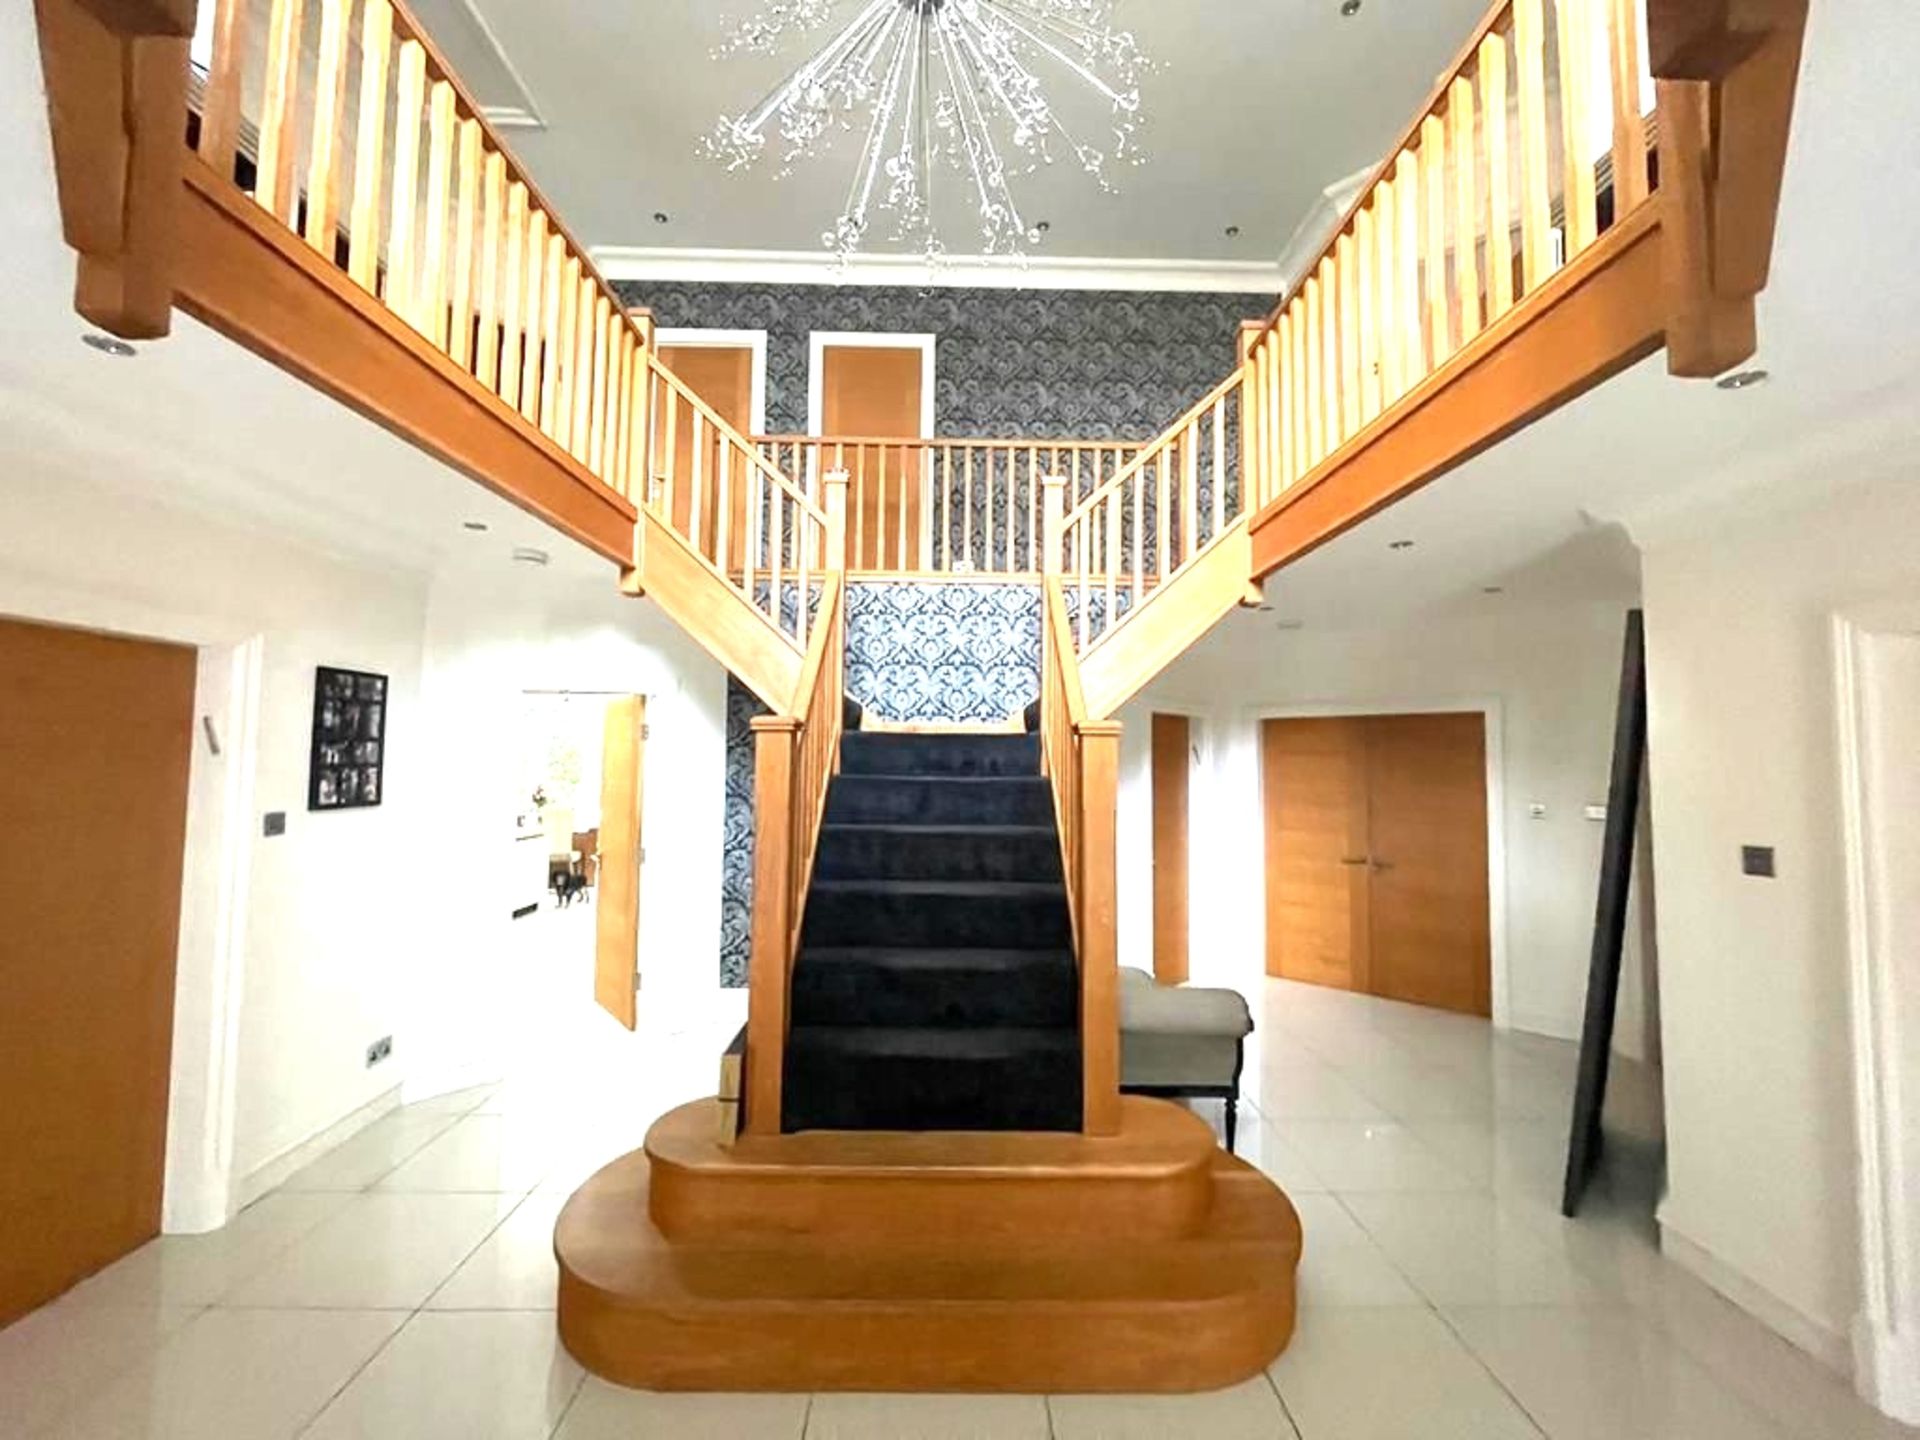 Solid Oak Staircase and Landing Accessories Including Spindles, Posts and Handrails - Approx 140